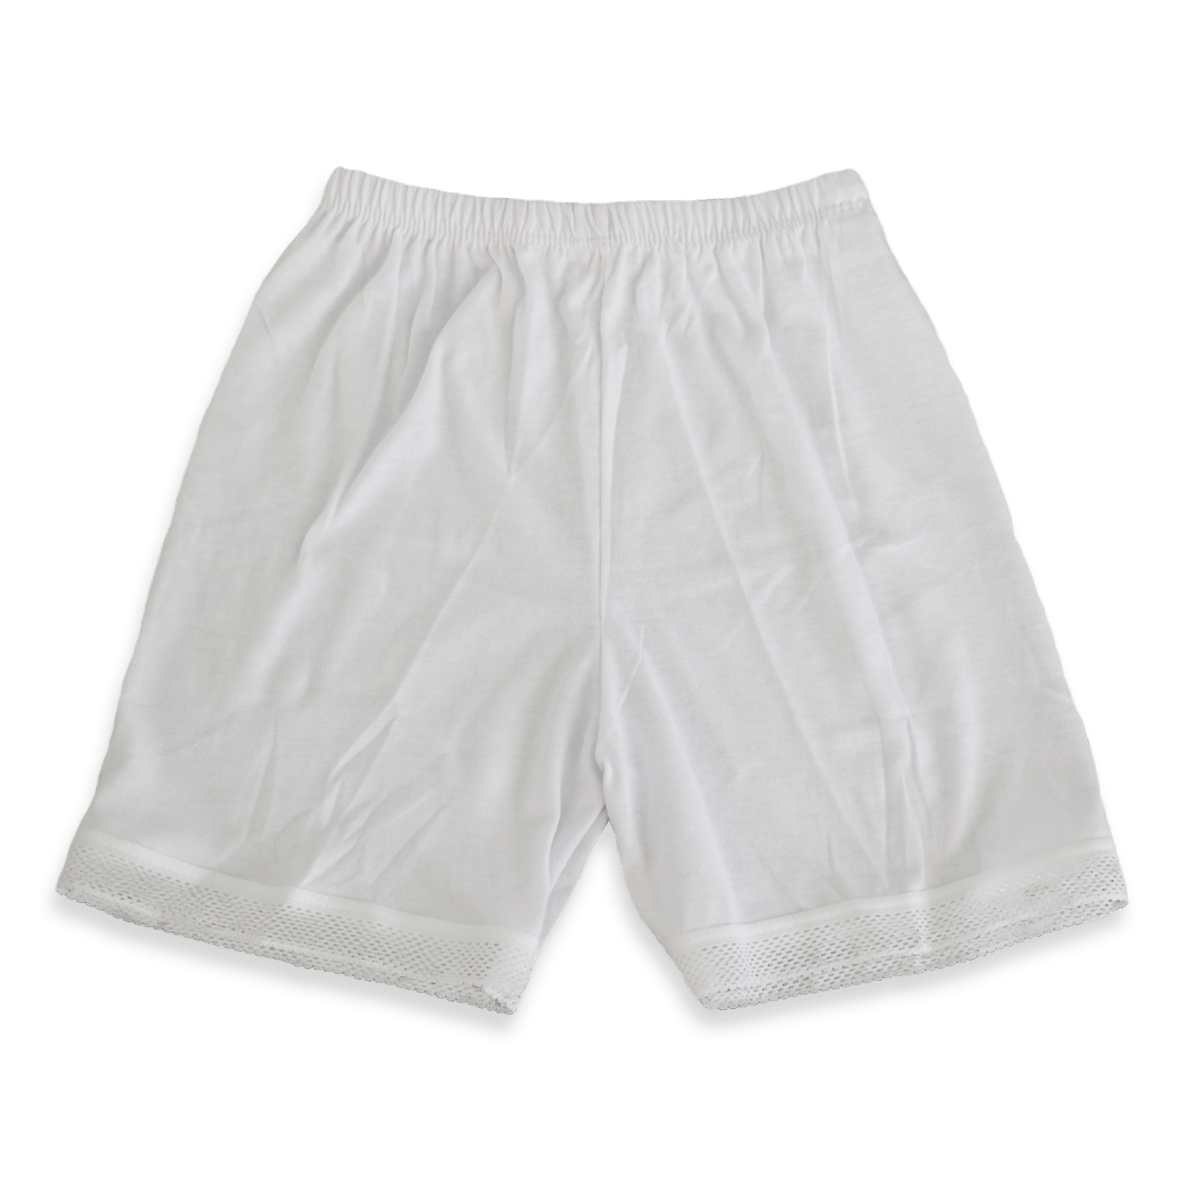 Velona Ladies Cotton Shorts with Lace Trimmed Elastic Border